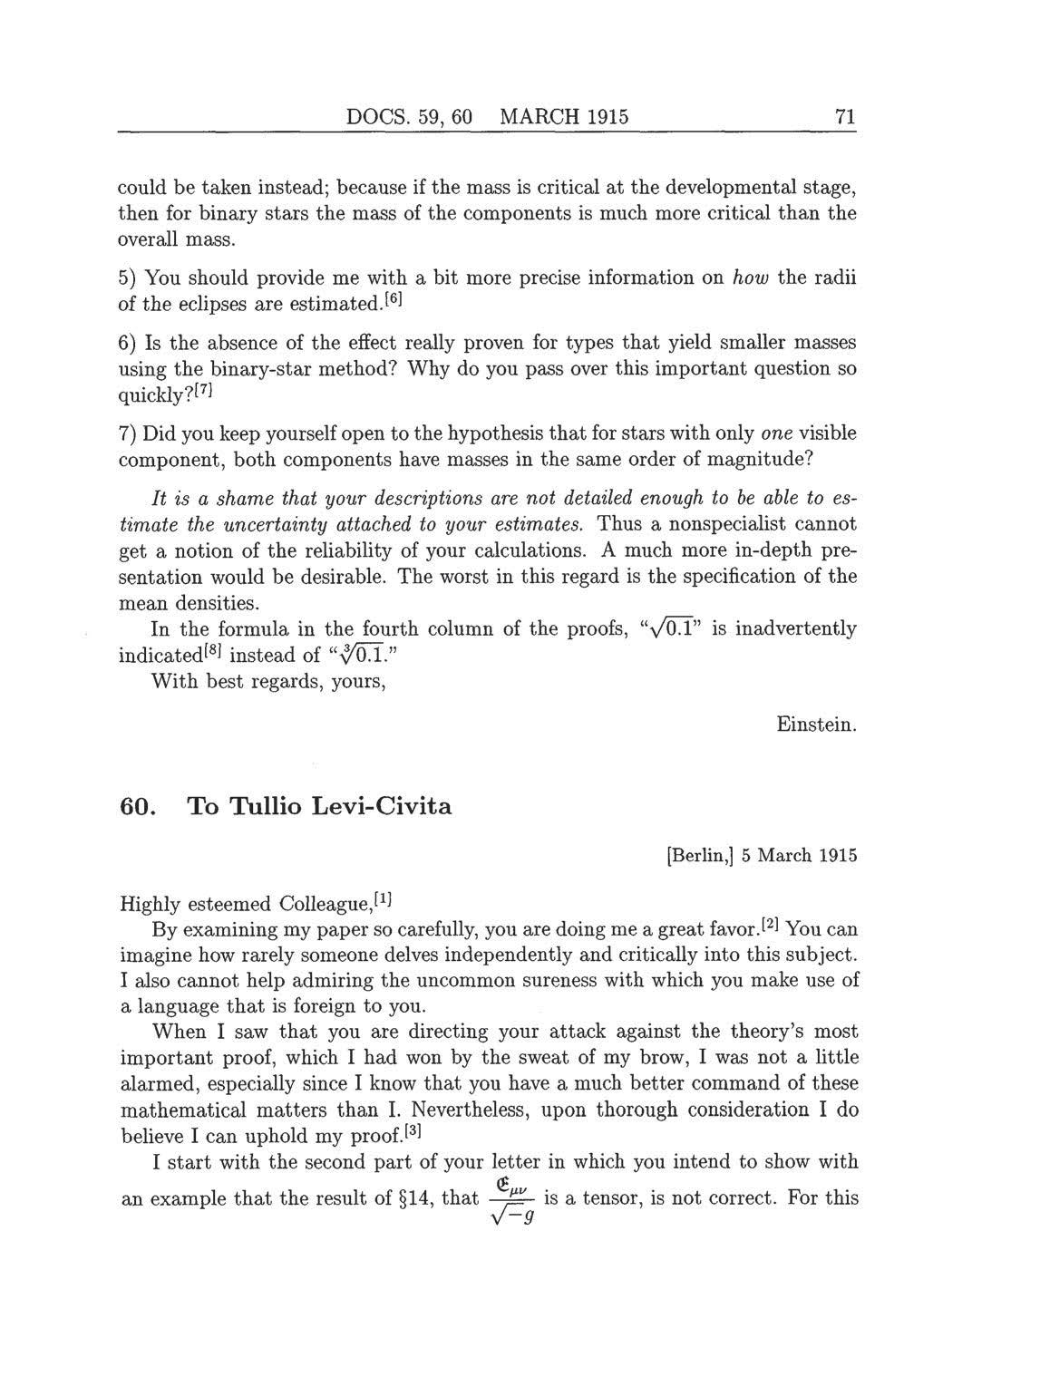 Volume 8: The Berlin Years: Correspondence, 1914-1918 (English translation supplement) page 71